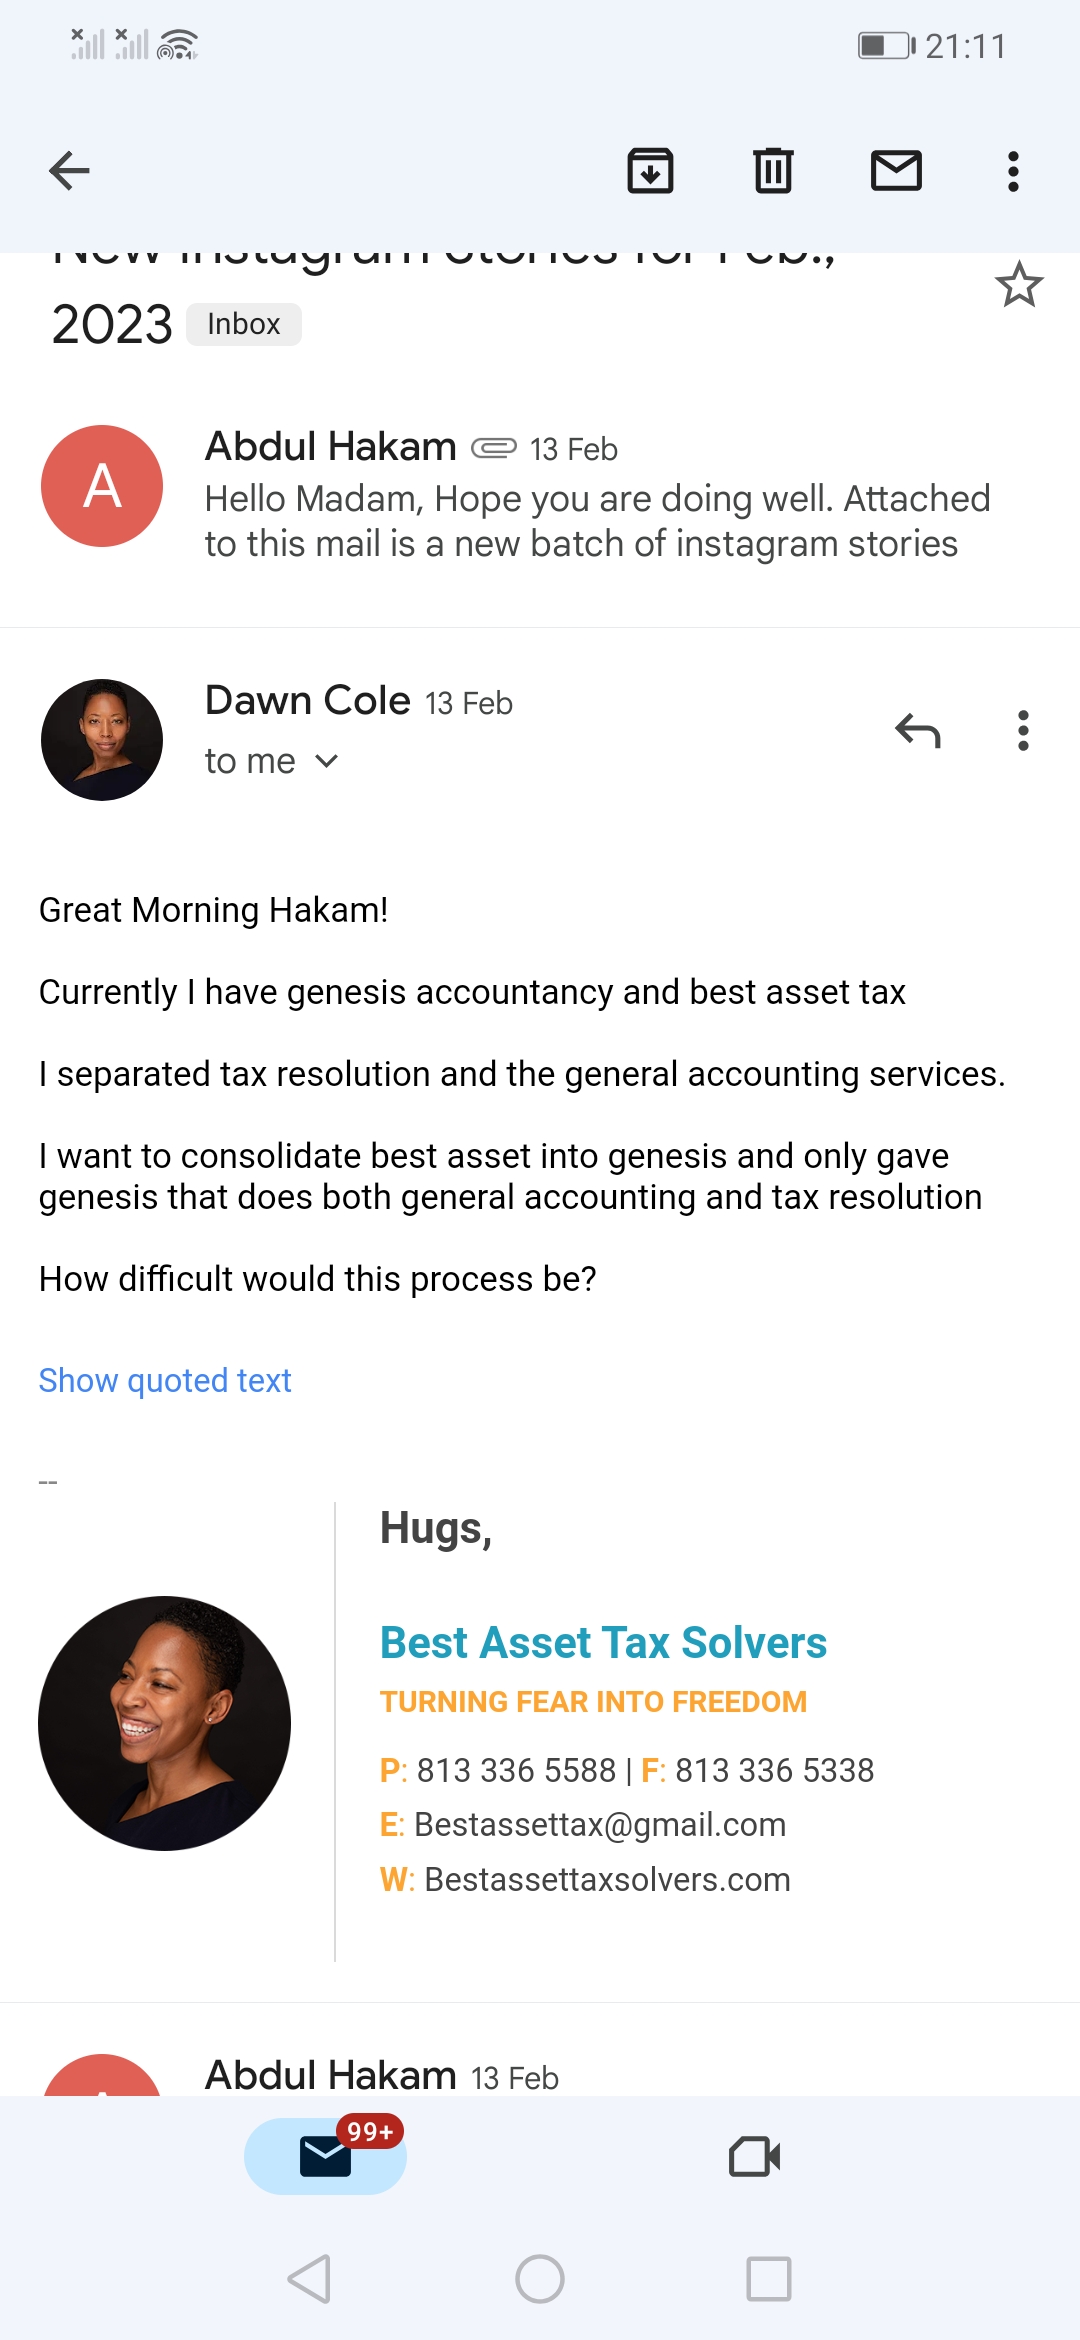 Emails from Dawn Cole (as mentioned above)